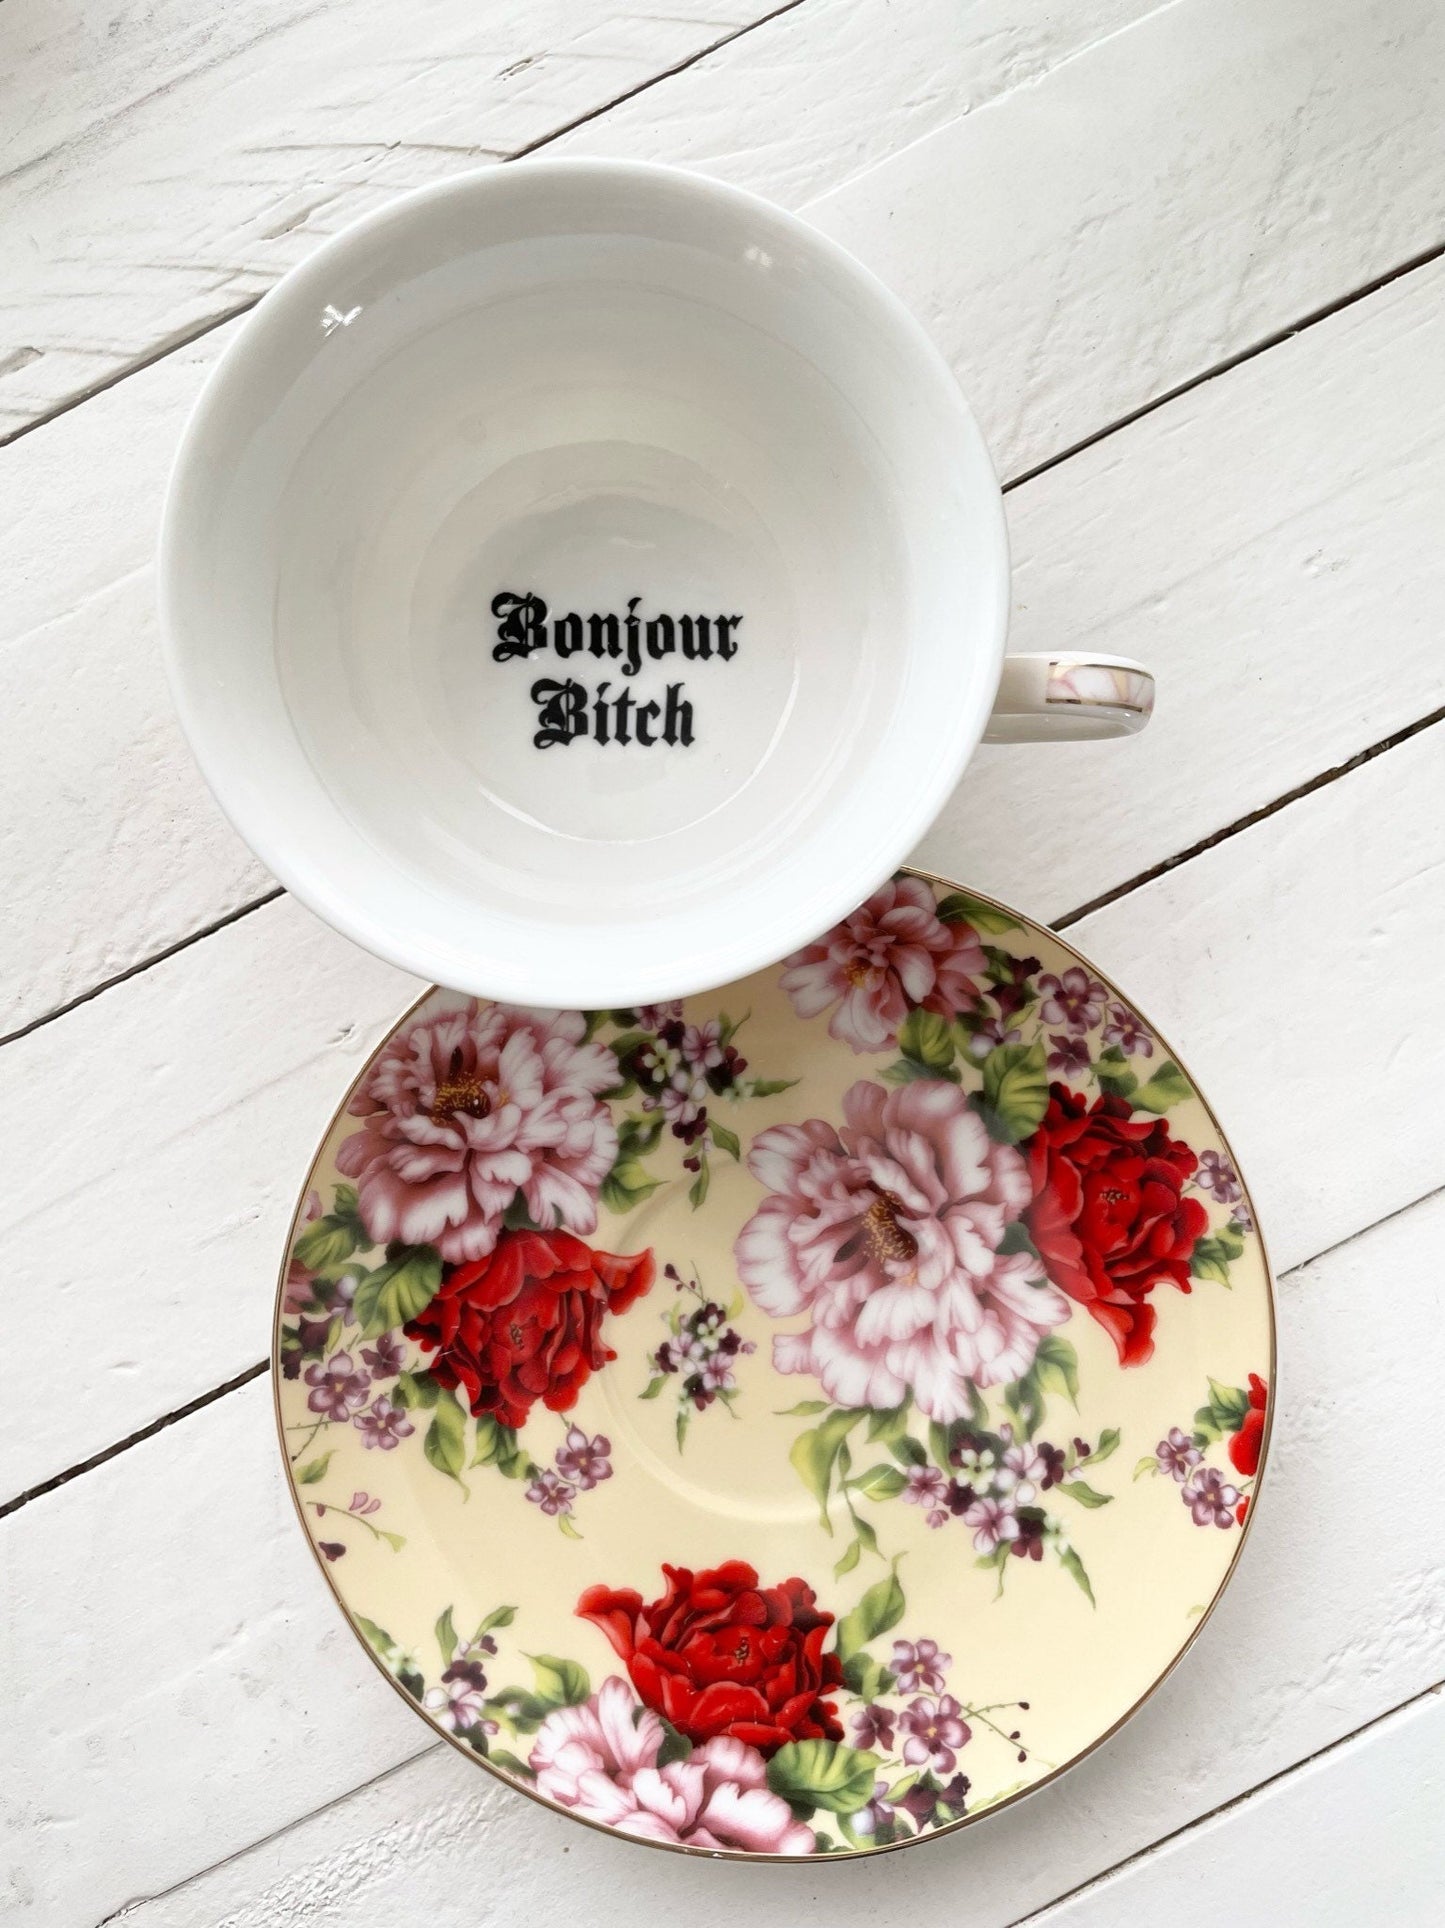 Bonjour Bitch, Tea Cup & Saucer, Yellow and Red Rose Floral Pattern